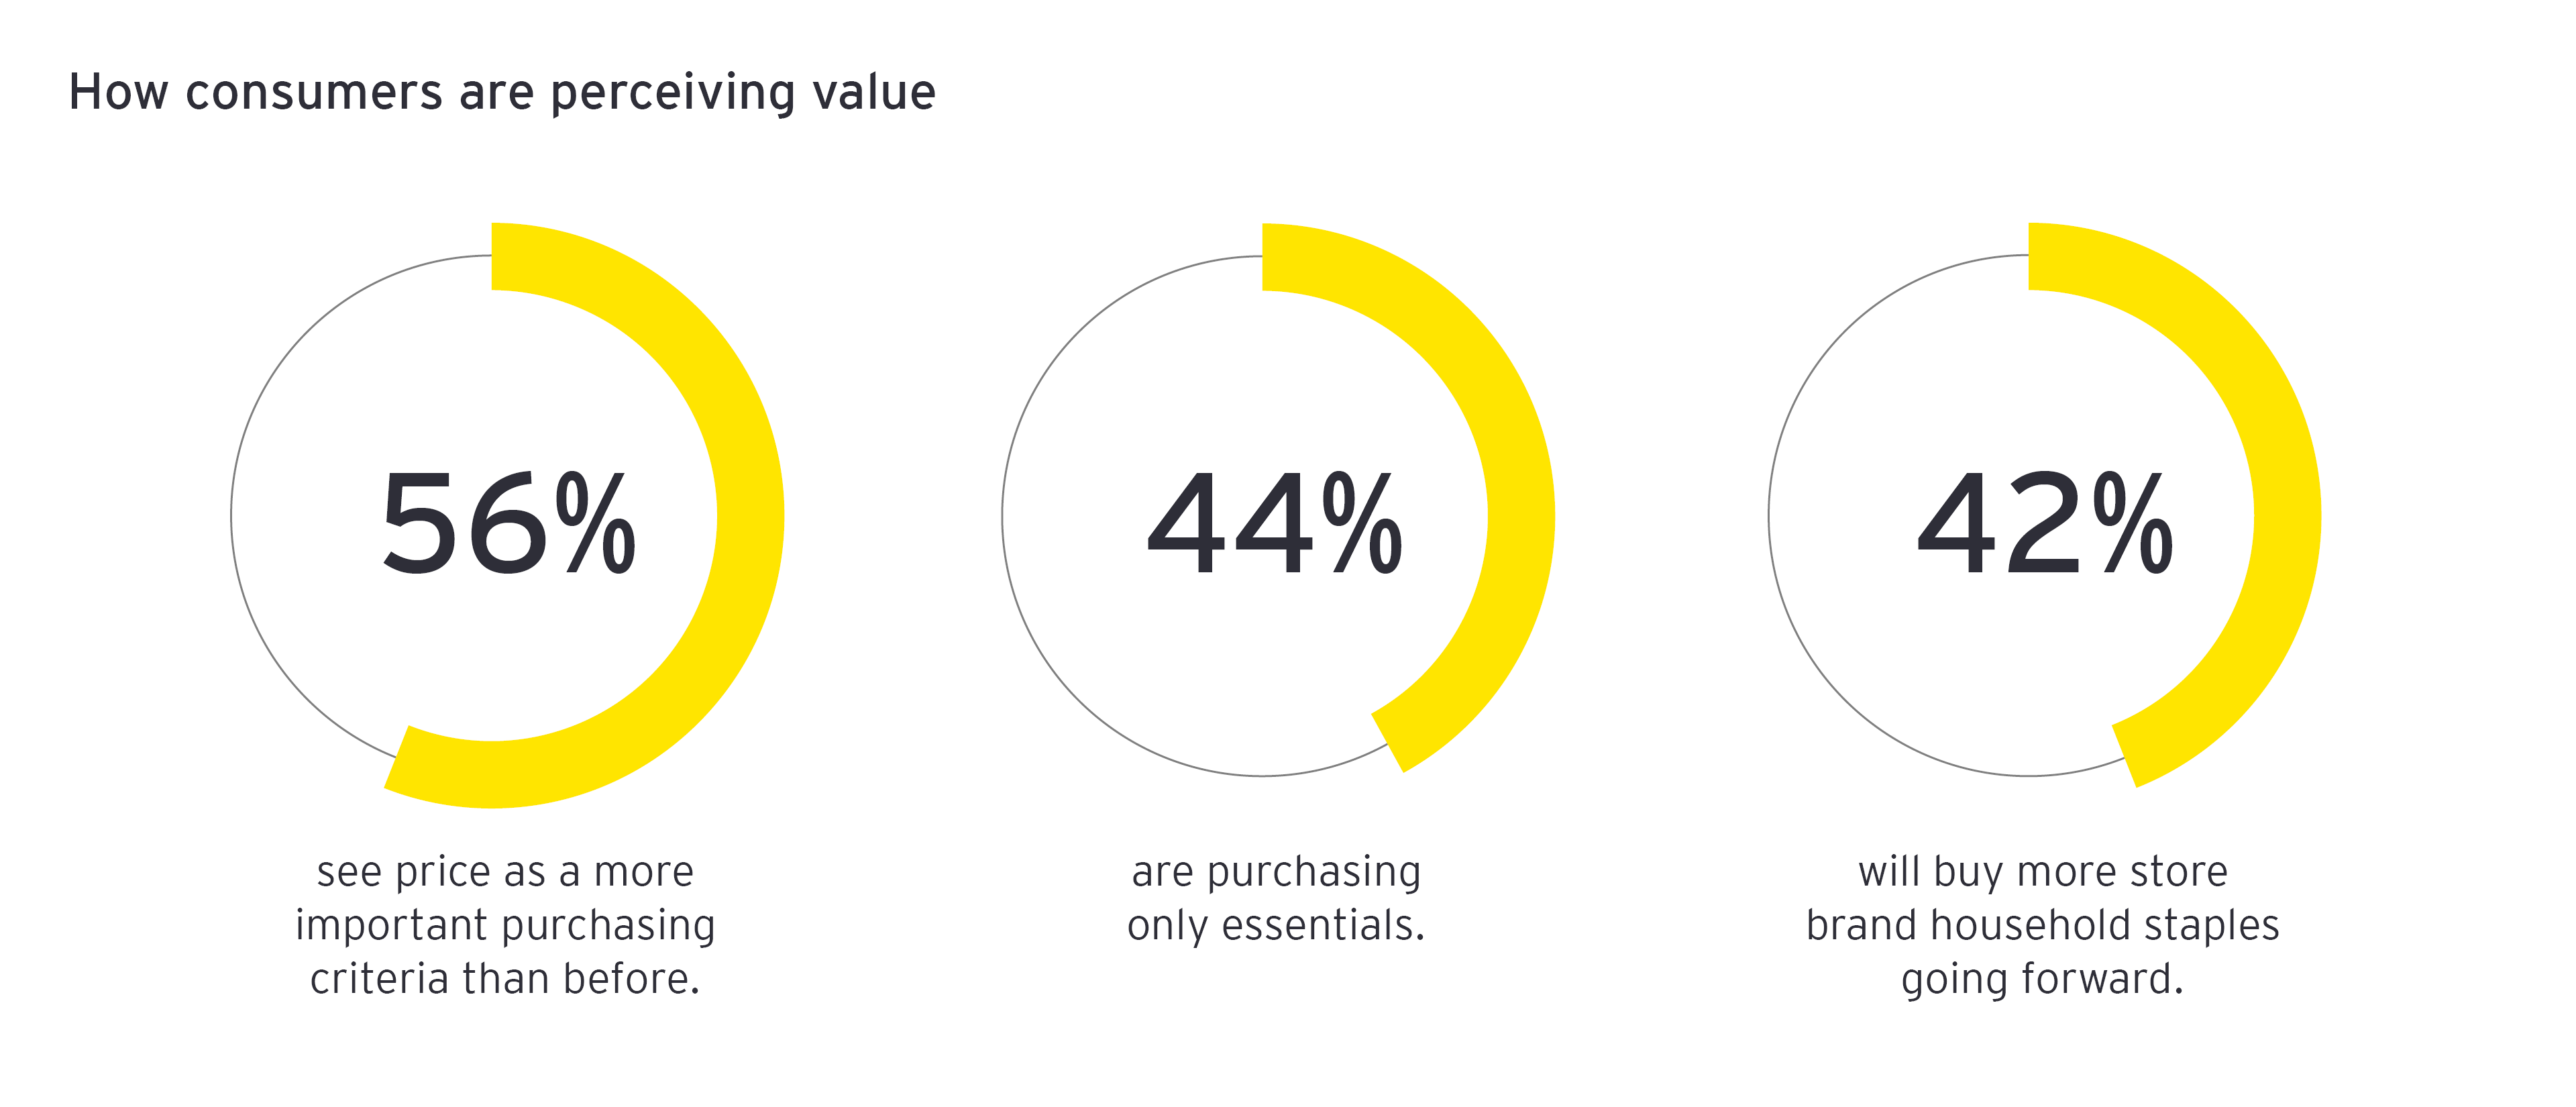 How consumers are perceiving value